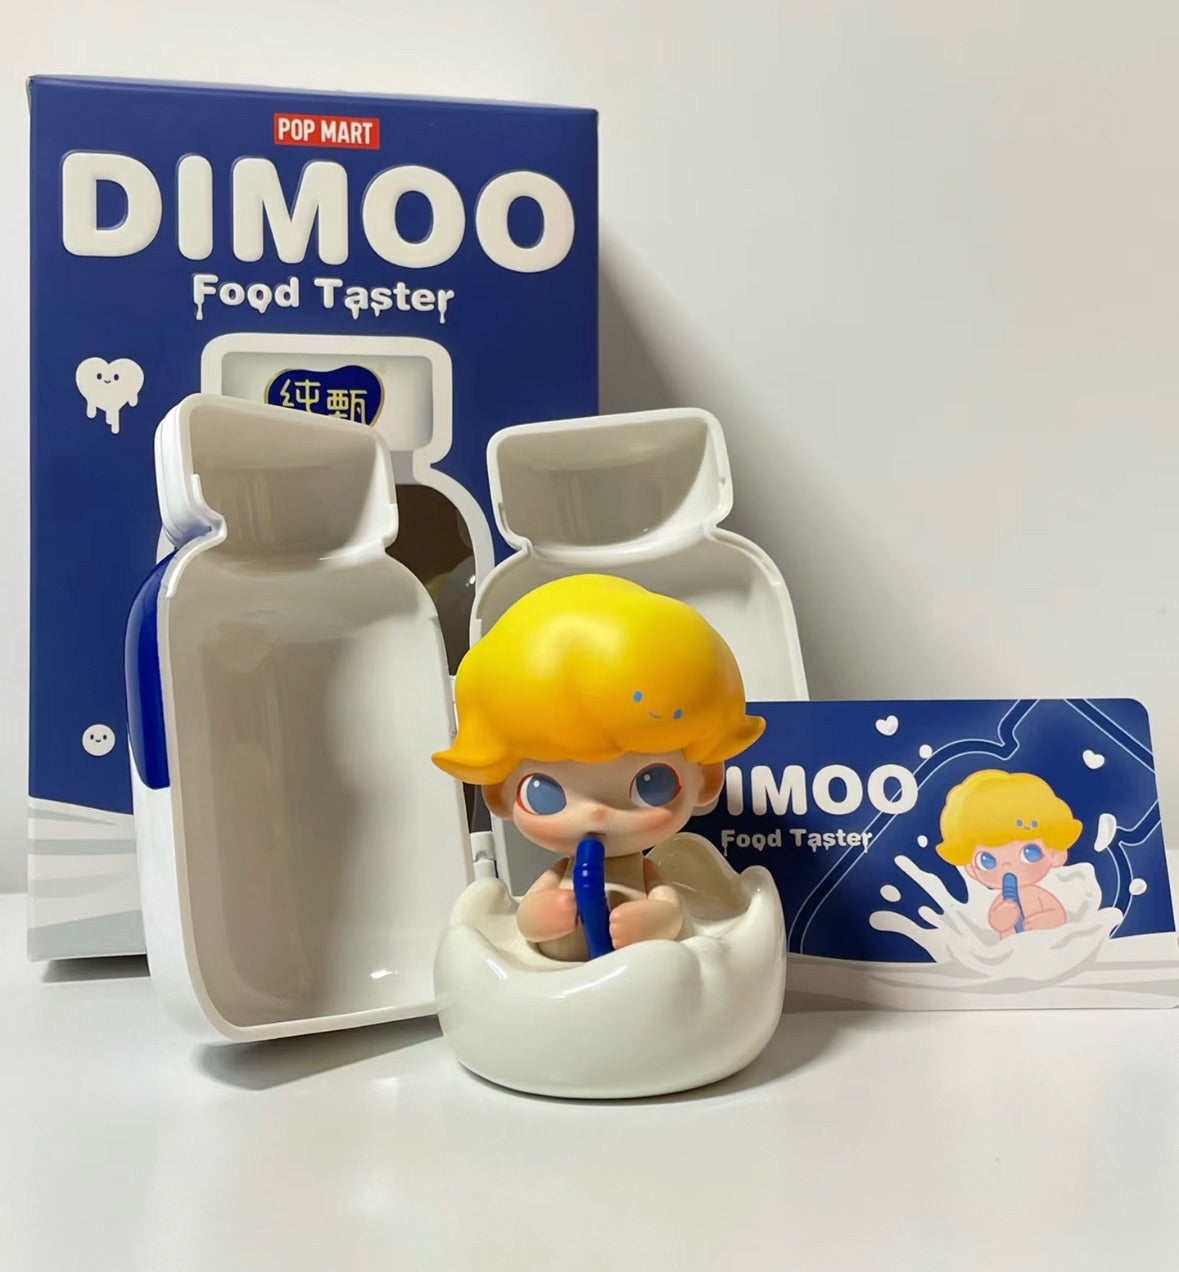 Dimoo Food Taster (LIMITED) by POP MART - 6